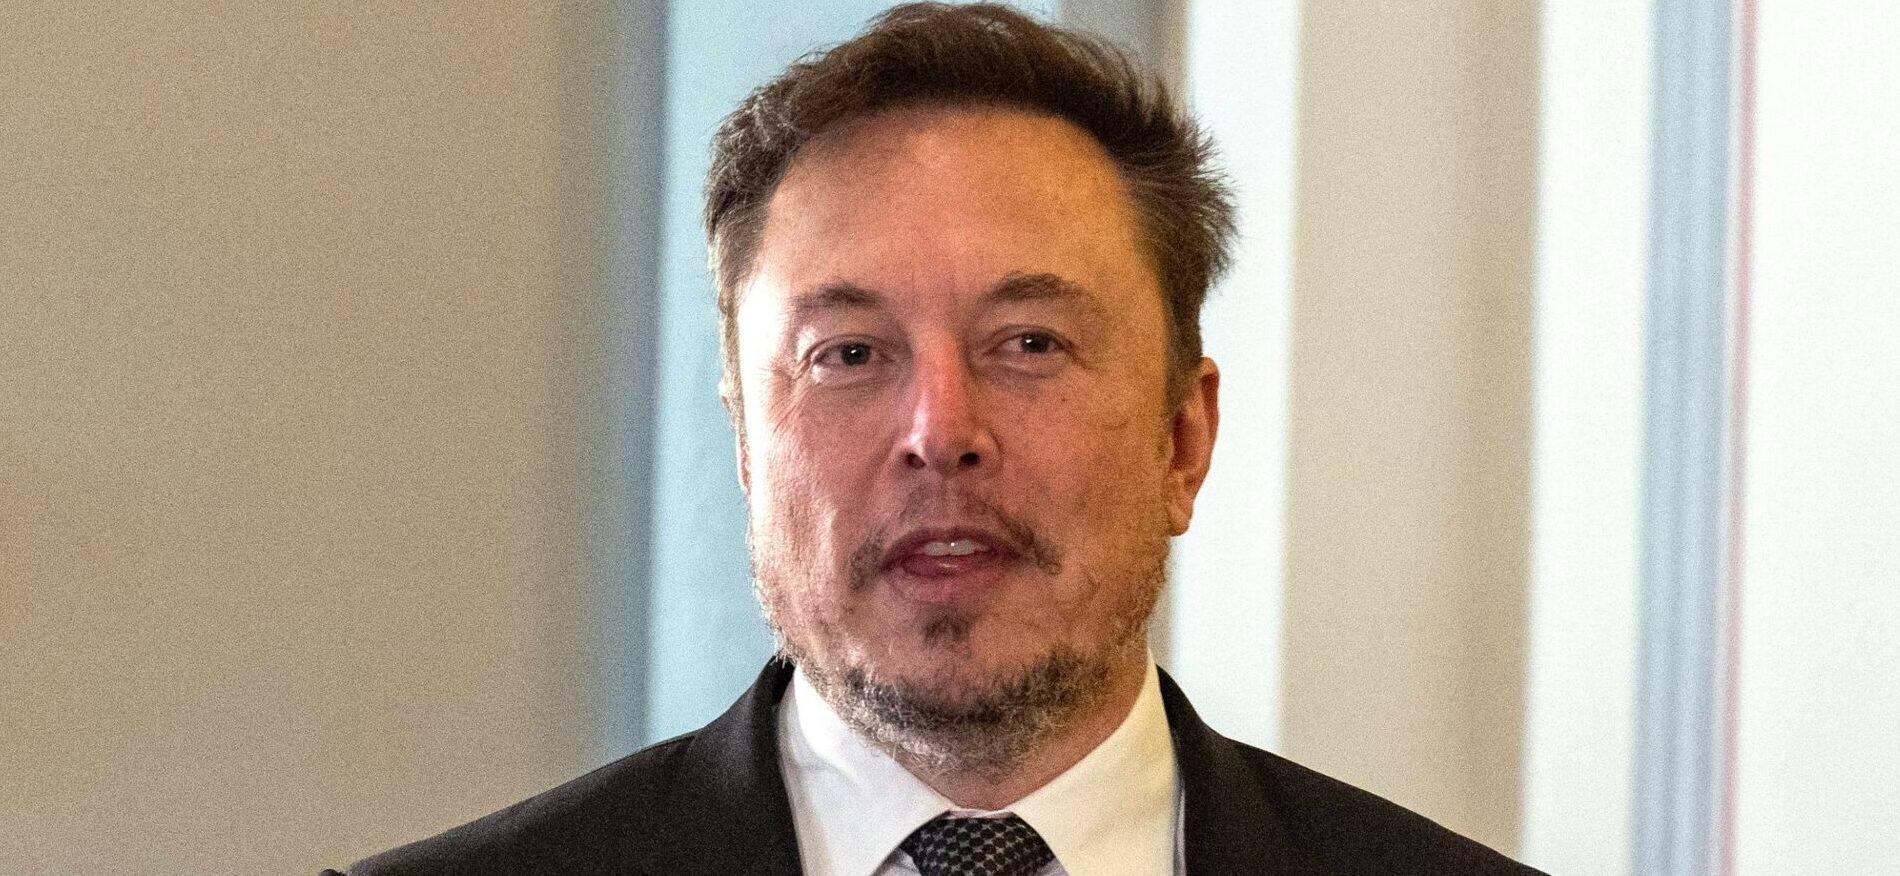 Indian Minister Wishes Elon Musk A ‘Speedy Recovery’ Prompting Worries About His Health